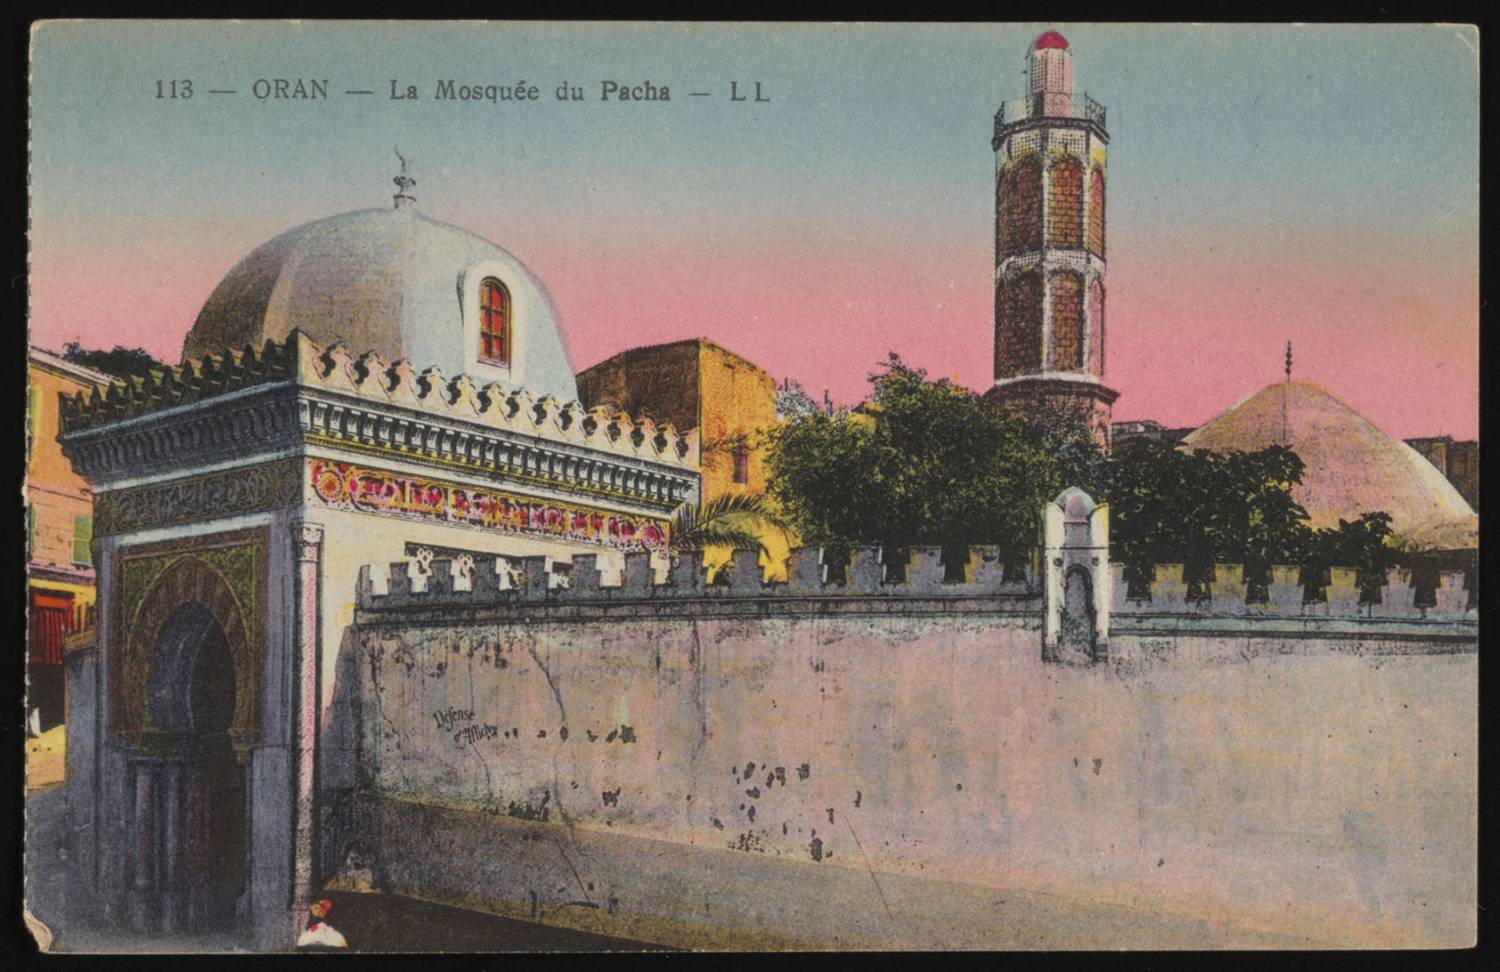 The Mosque of Pacha in Oran, full view